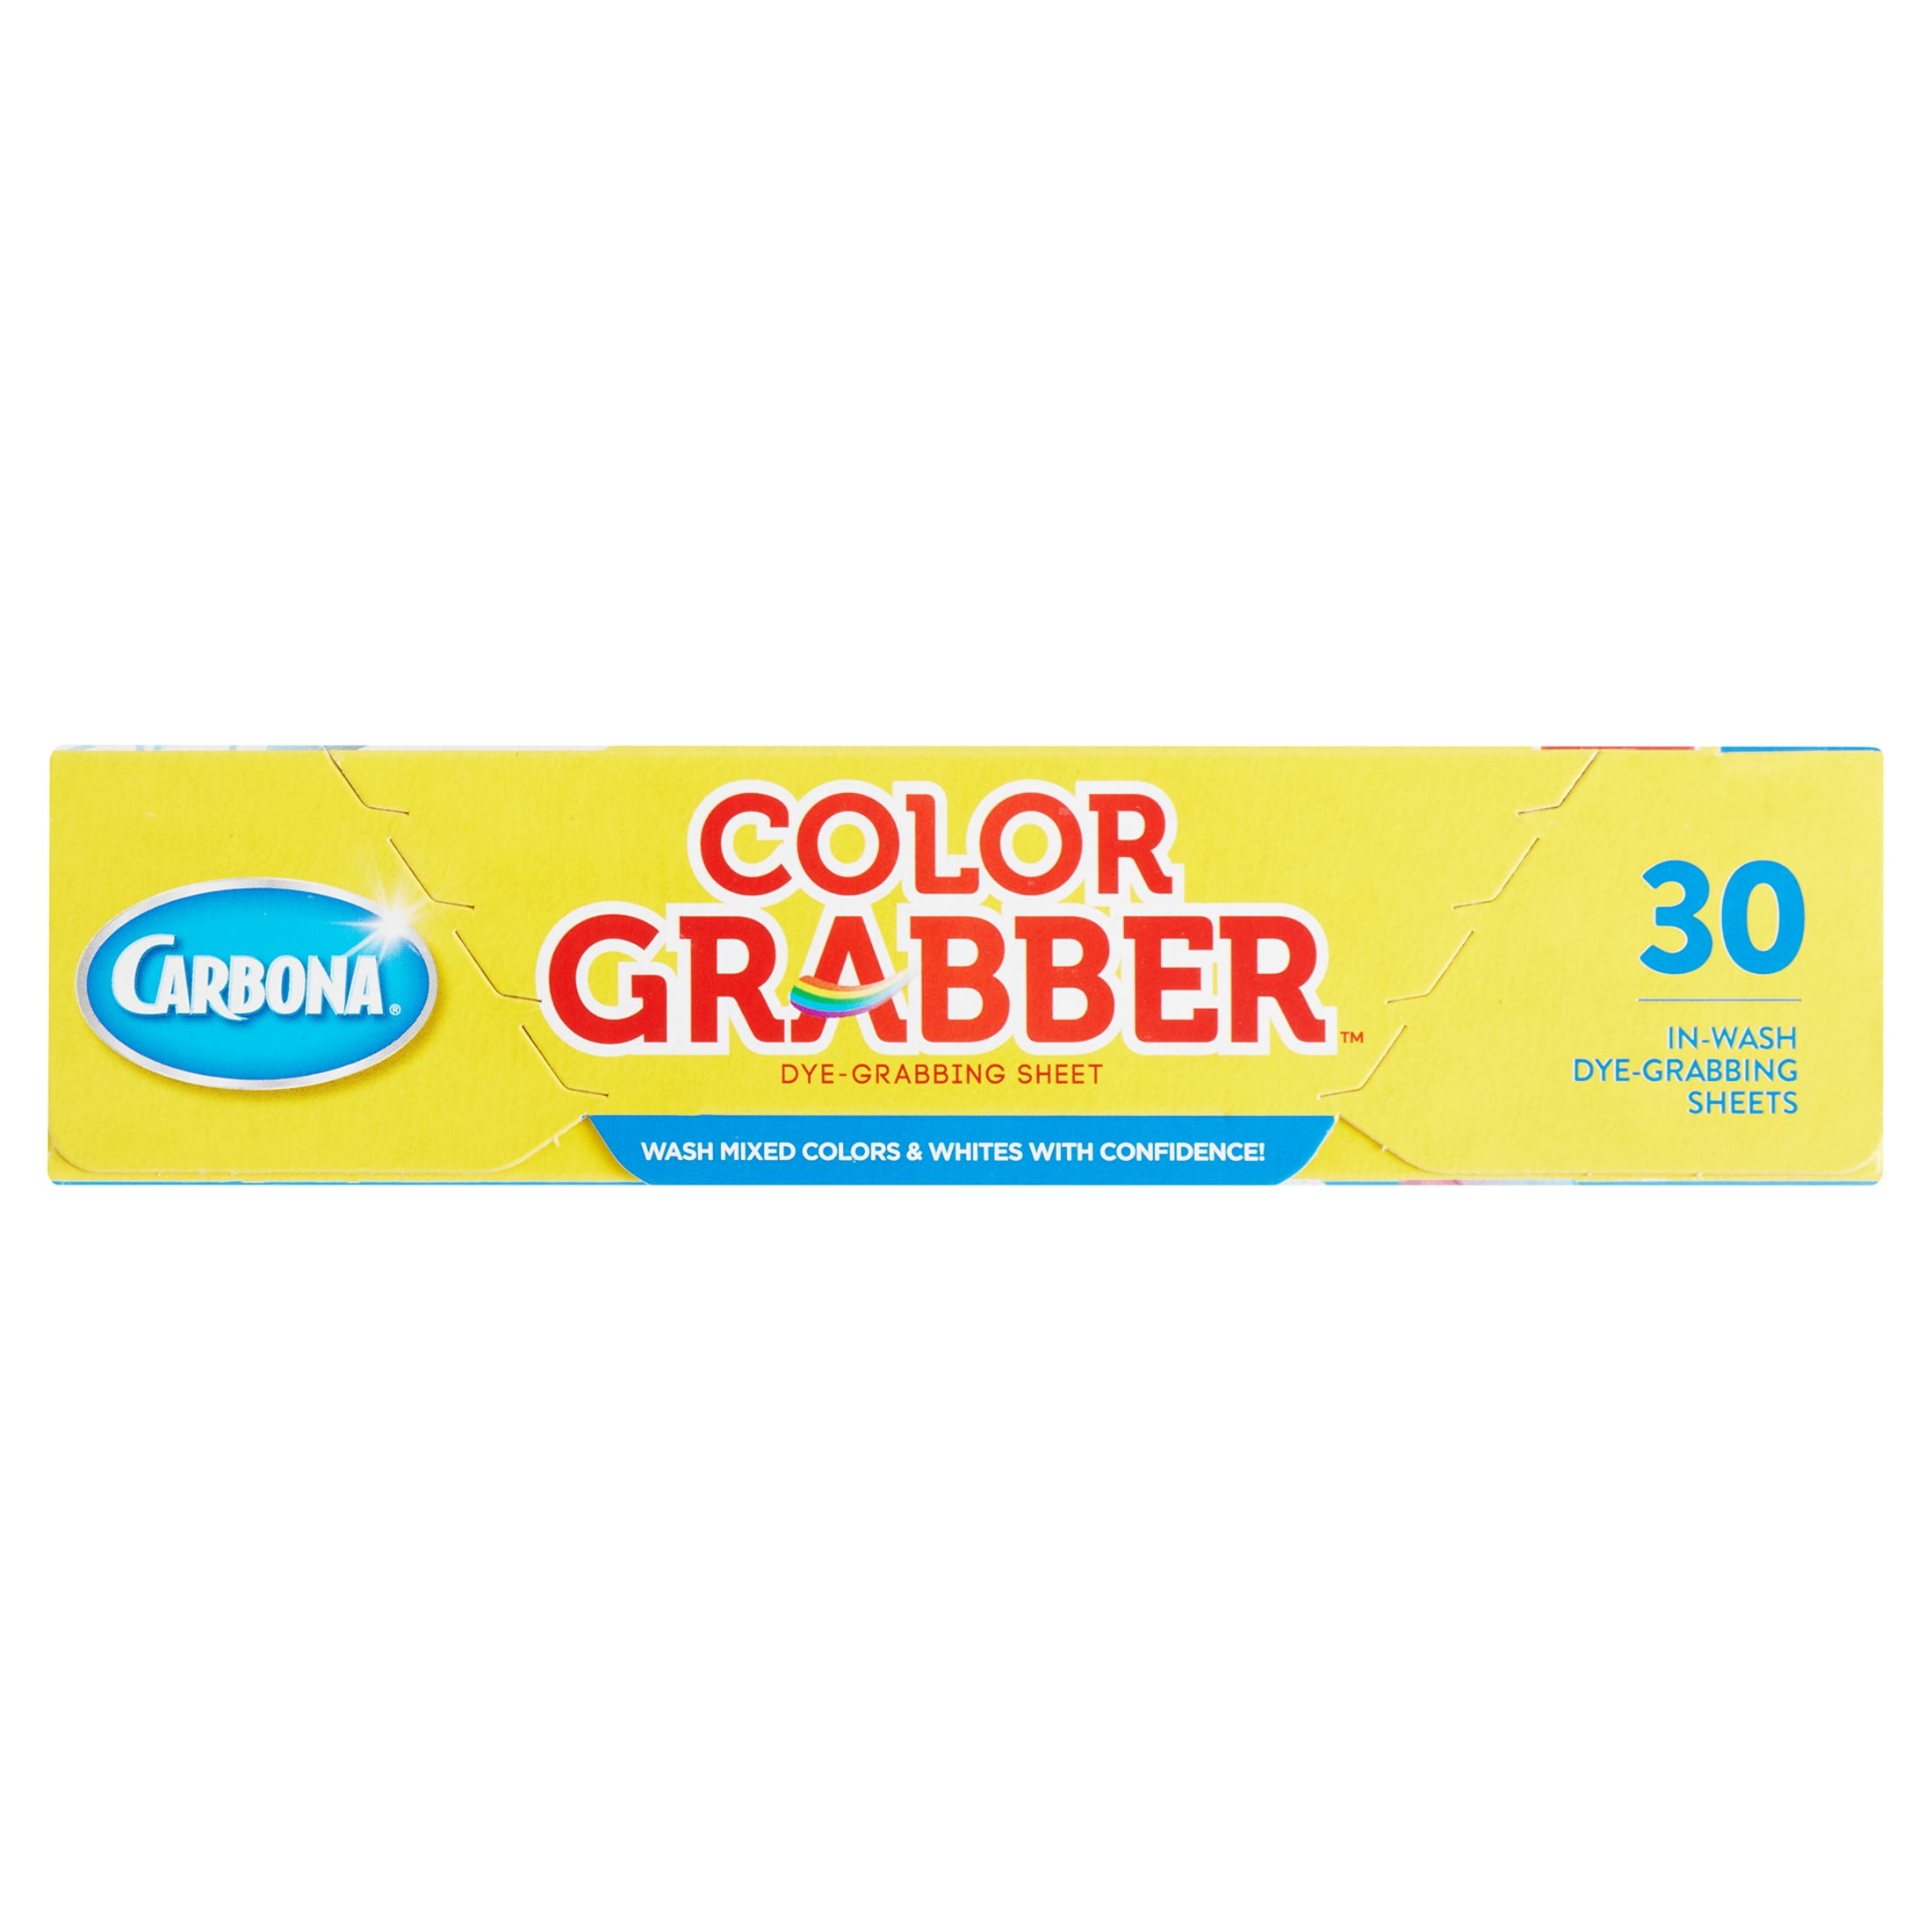 Carbona Color Grabber with Microfiber in-wash Sheets, 30 Count